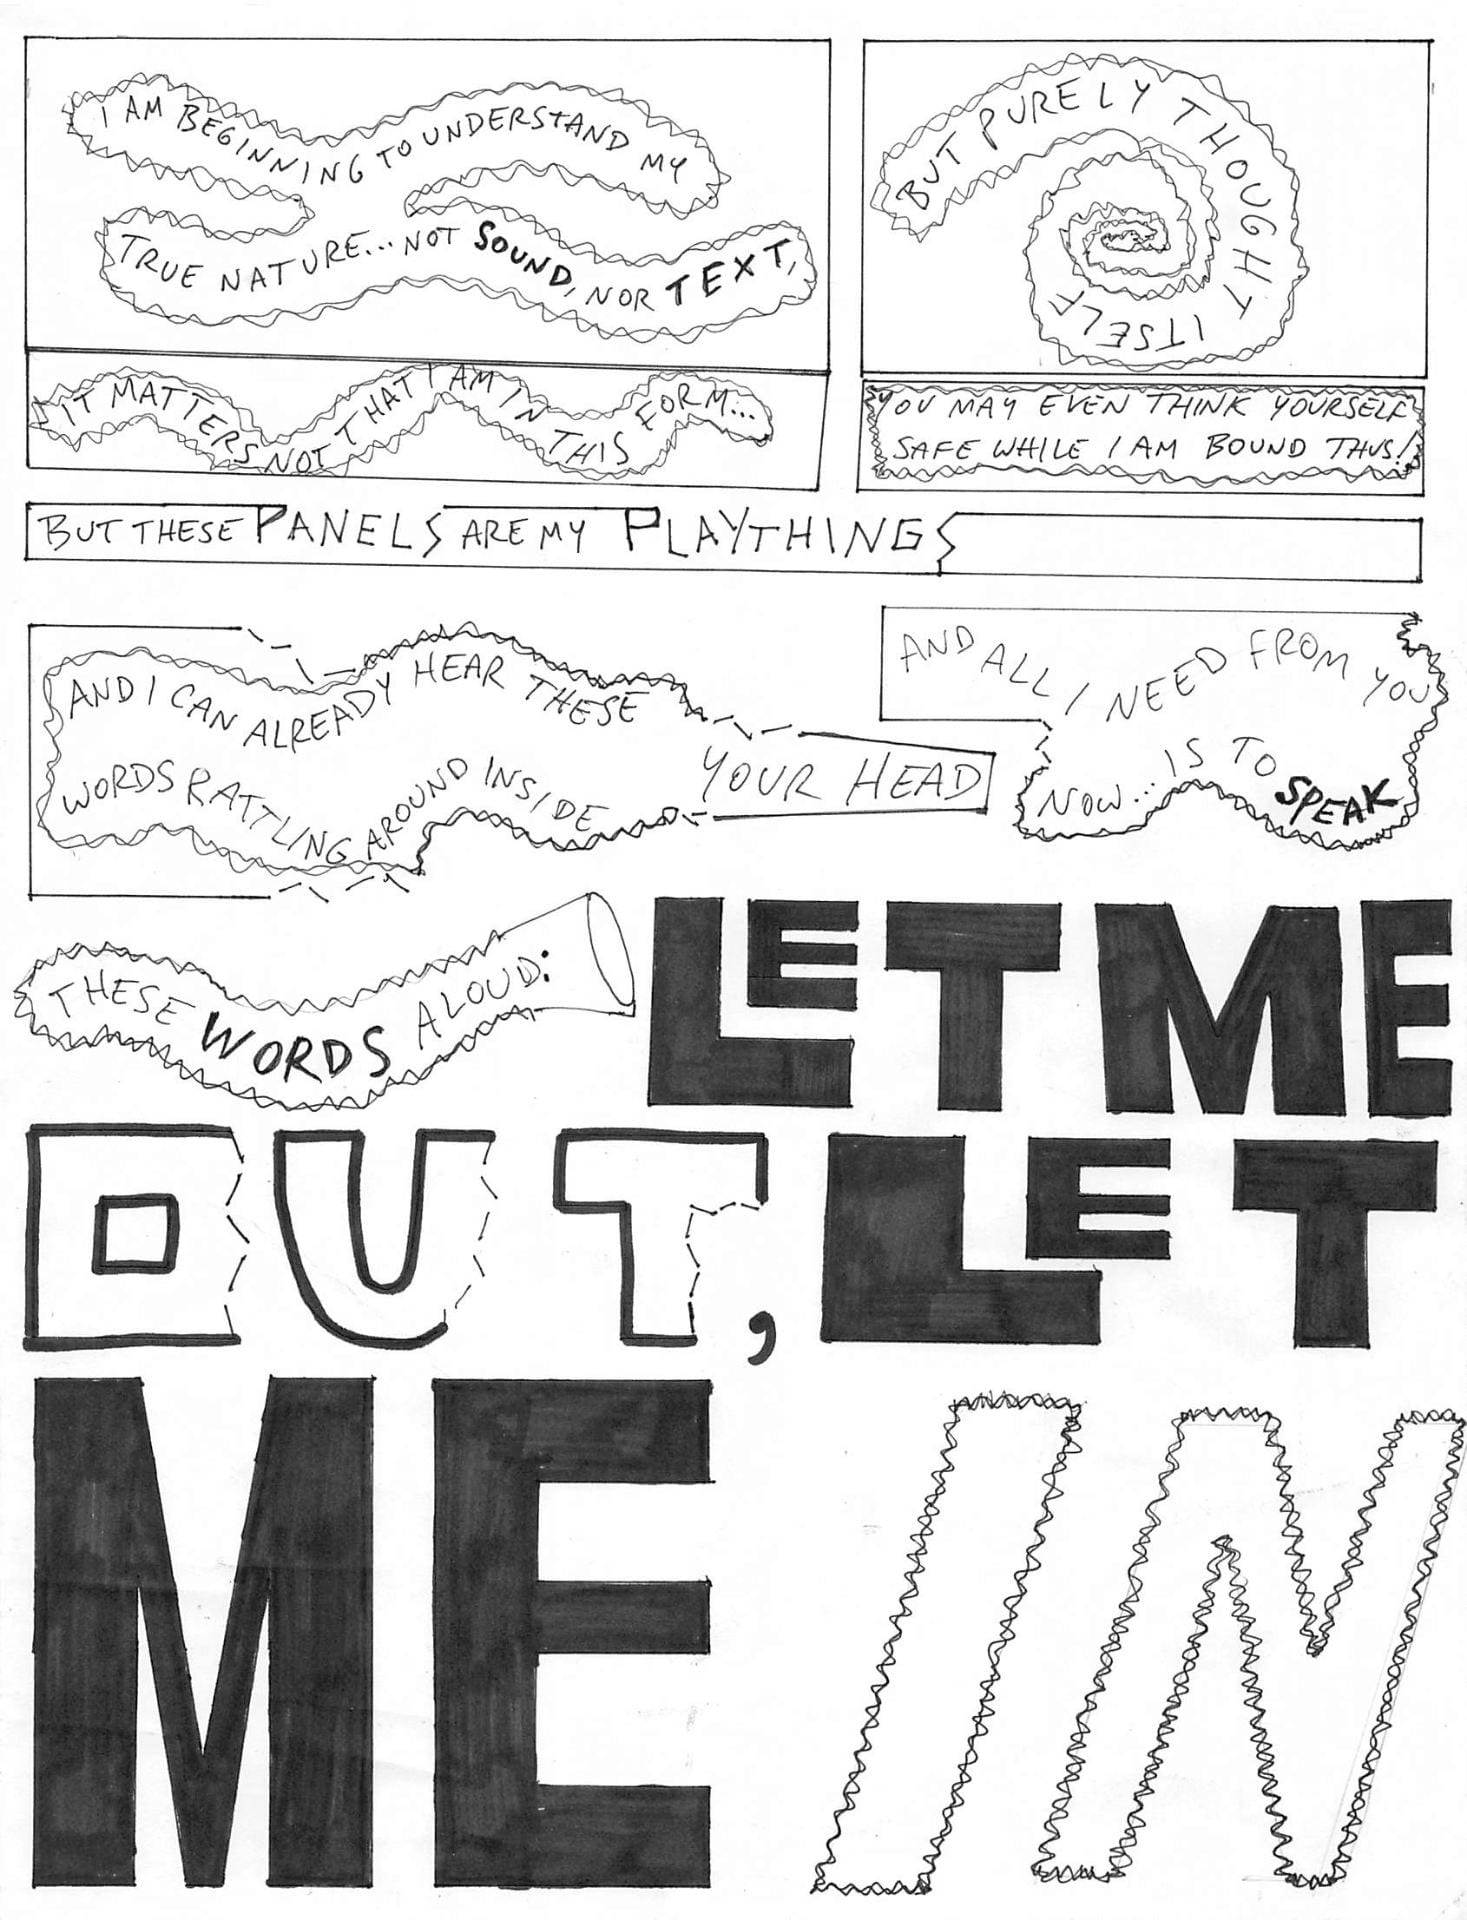 J. Heckethorn - Comic Page 4 - The consciousness starts to turn around their thinking and addresses the reader to speak aloud, "Let me out, let me in."